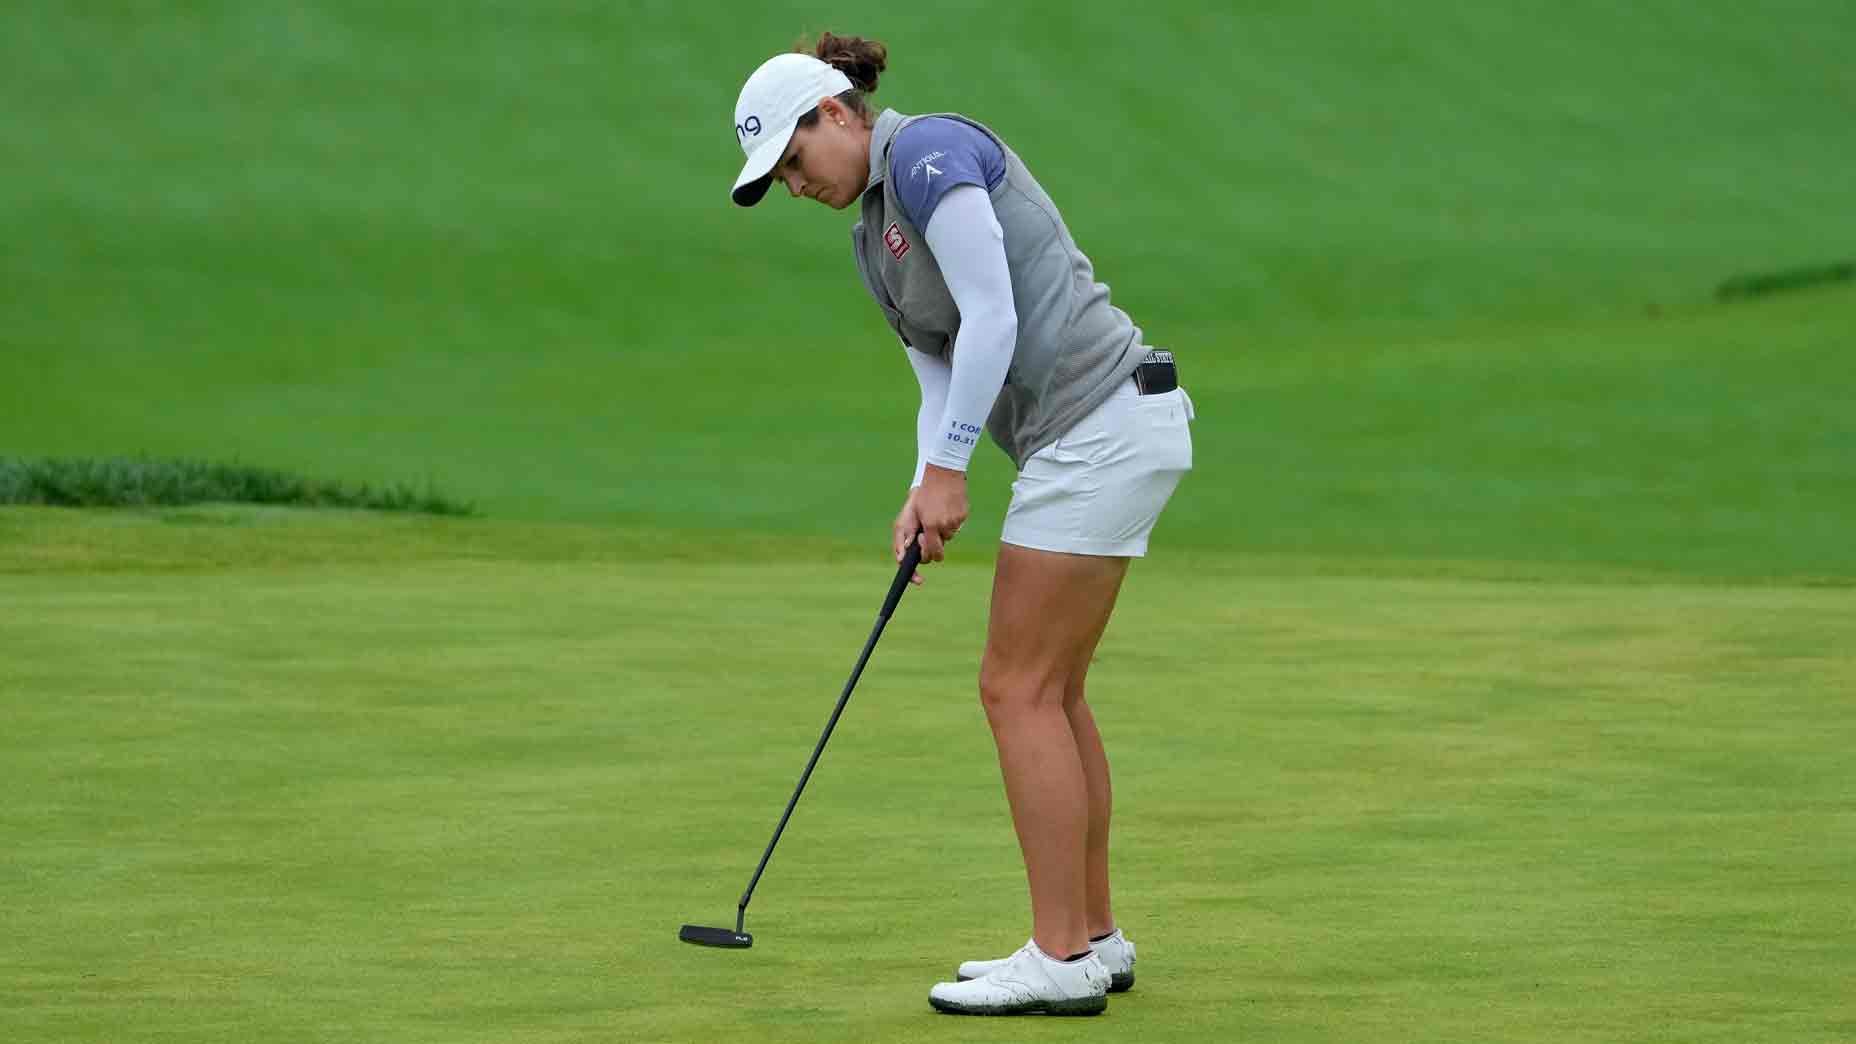 How this putting tool helped propel Ally Ewing to her third career LPGA win